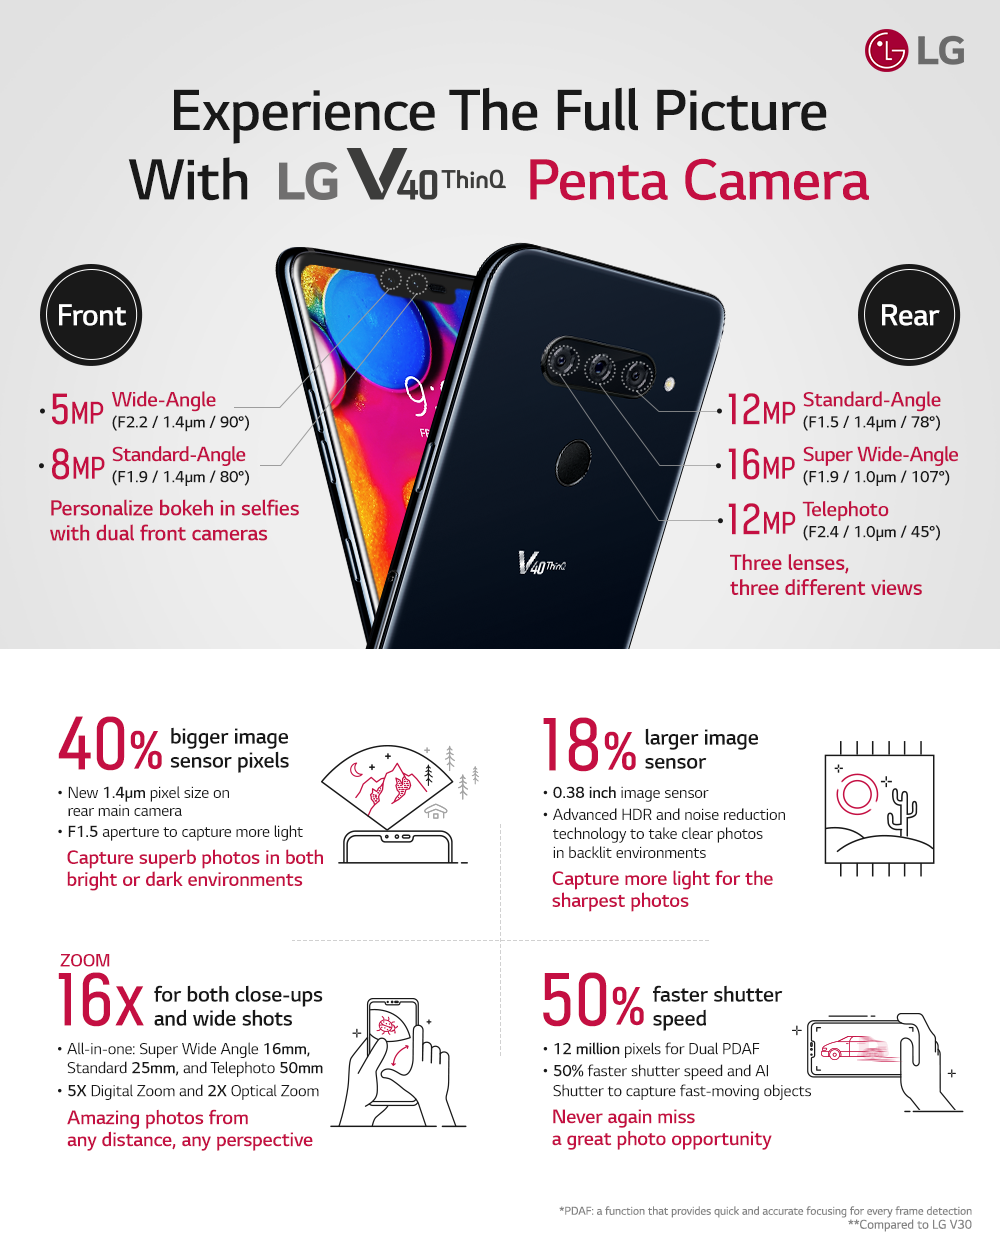 The “Experience the Full Picture with LG V40 ThinQ Penta Camera,” infographic introduces LG V40 ThinQ’s 40-percent bigger image sensor pixels, 18-percent larger image sensor, 16X zoom and 50-percent faster shutter speed.